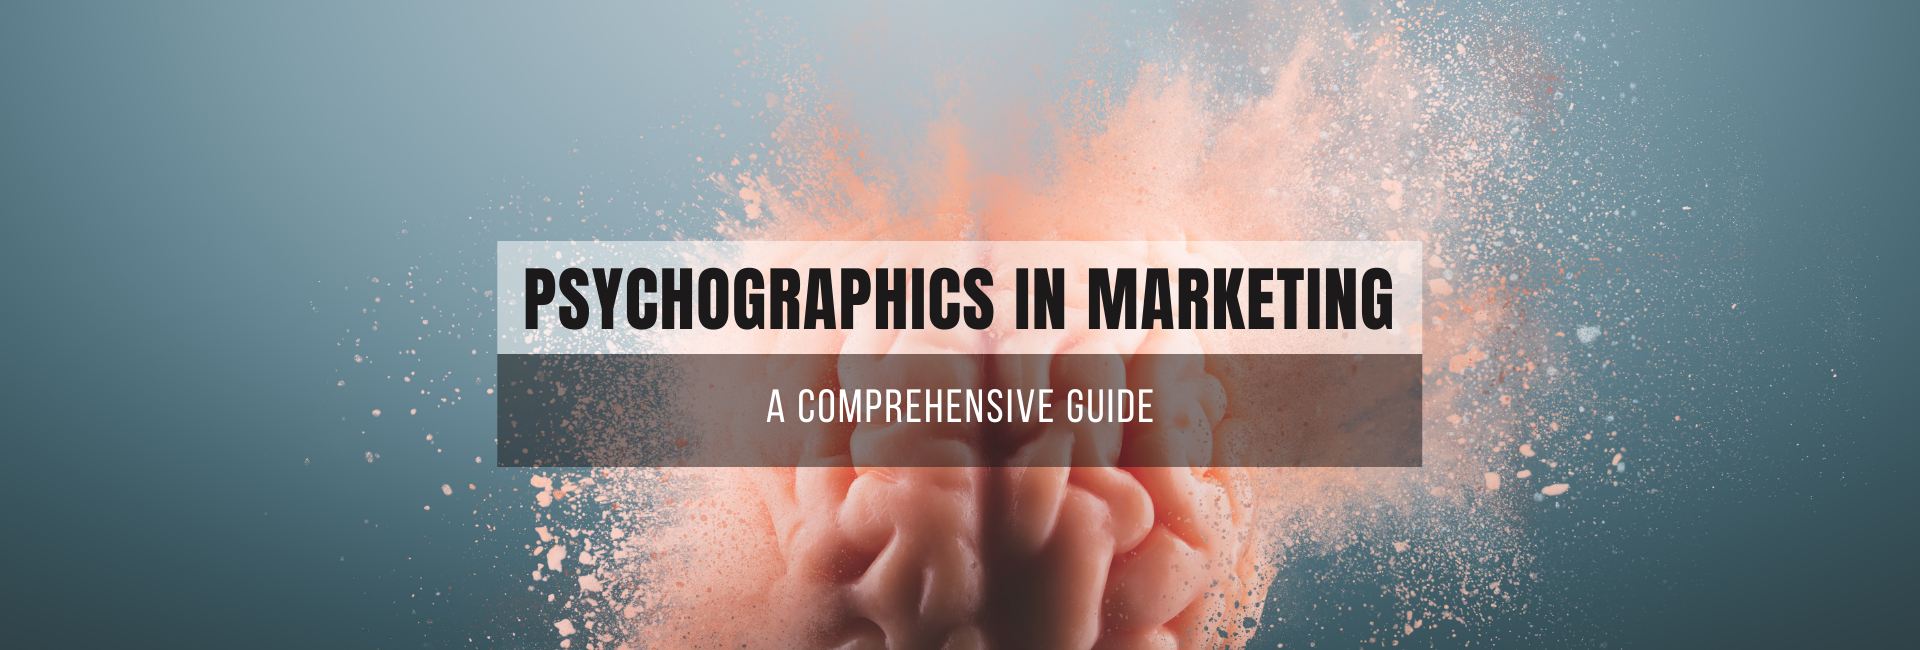 Psychographics in Marketing: A Comprehensive Guide